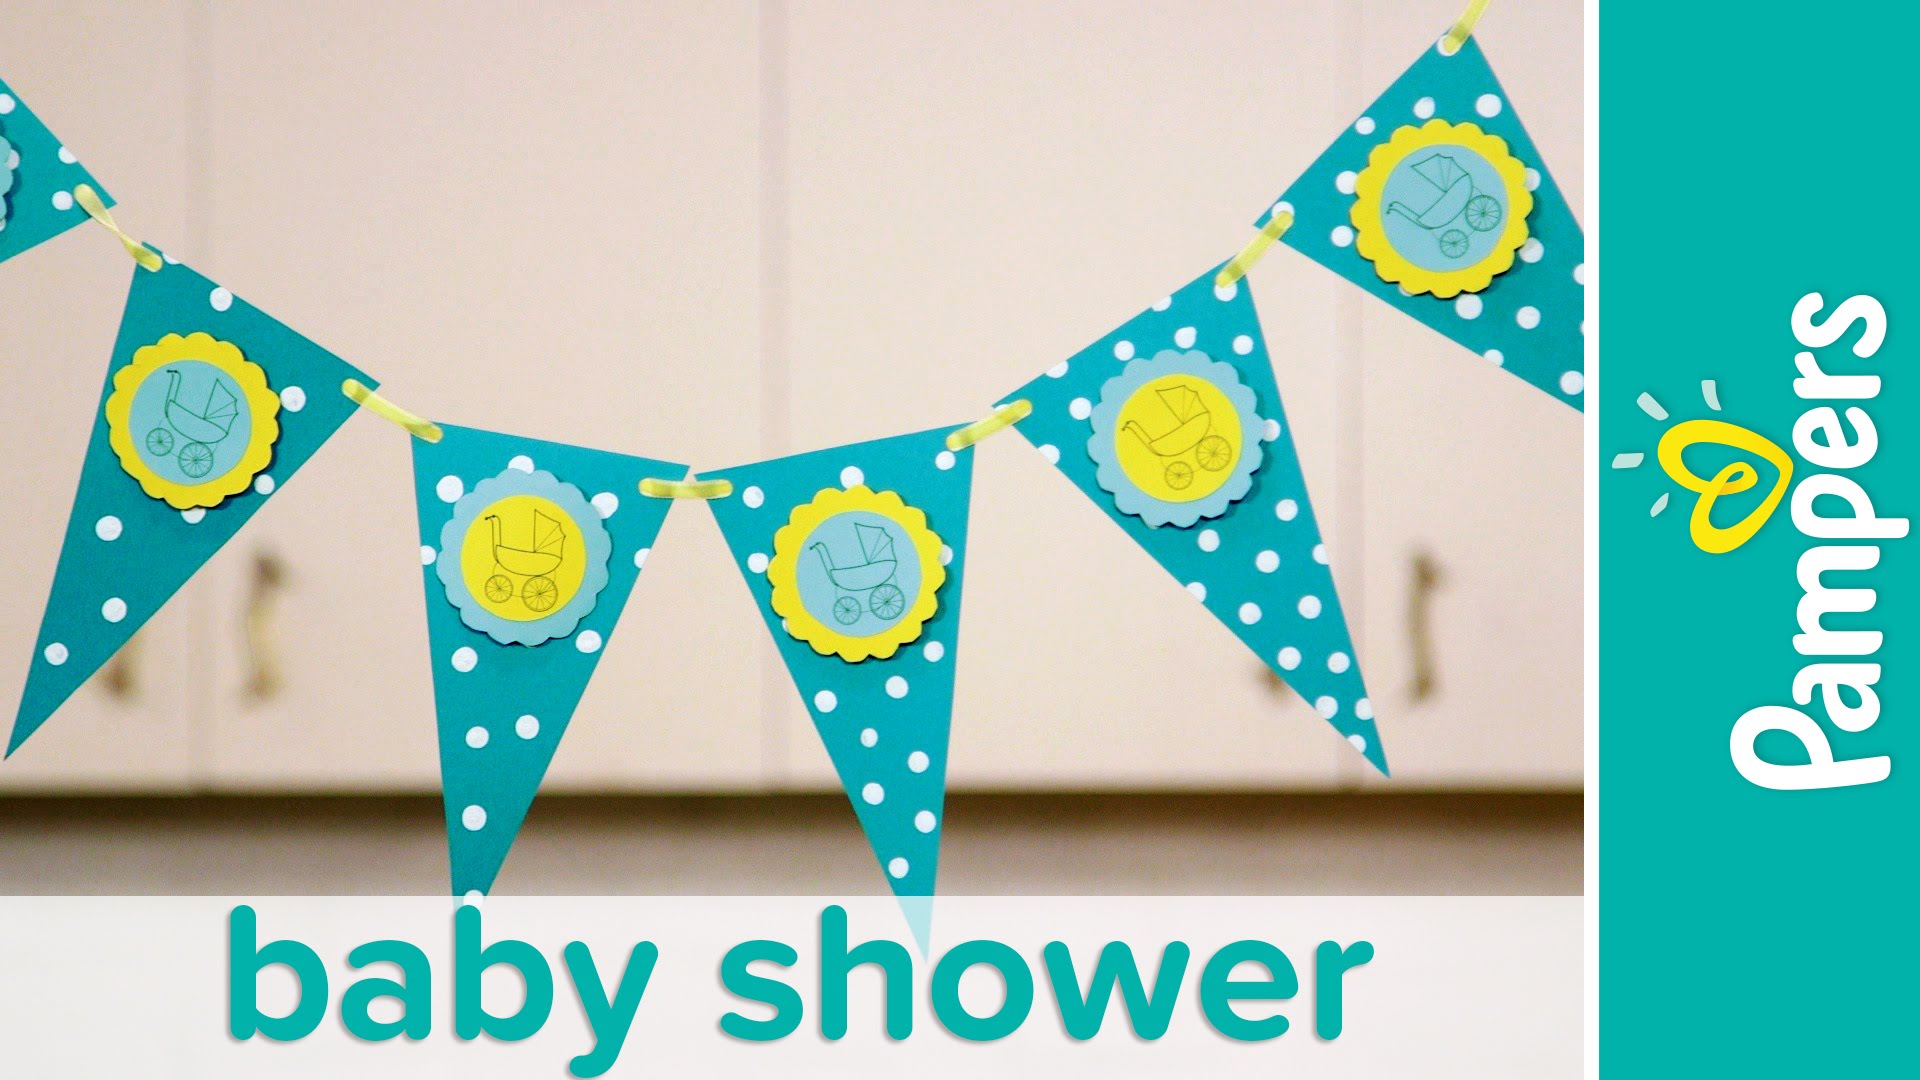 Full Size of Baby Shower:89+ Indulging Baby Shower Banner Picture Inspirations Baby Shower Dessert Table Baby Shower Desserts Best Shows For Babies Cosas De Baby Shower Baby Shower Hashtag Ideas